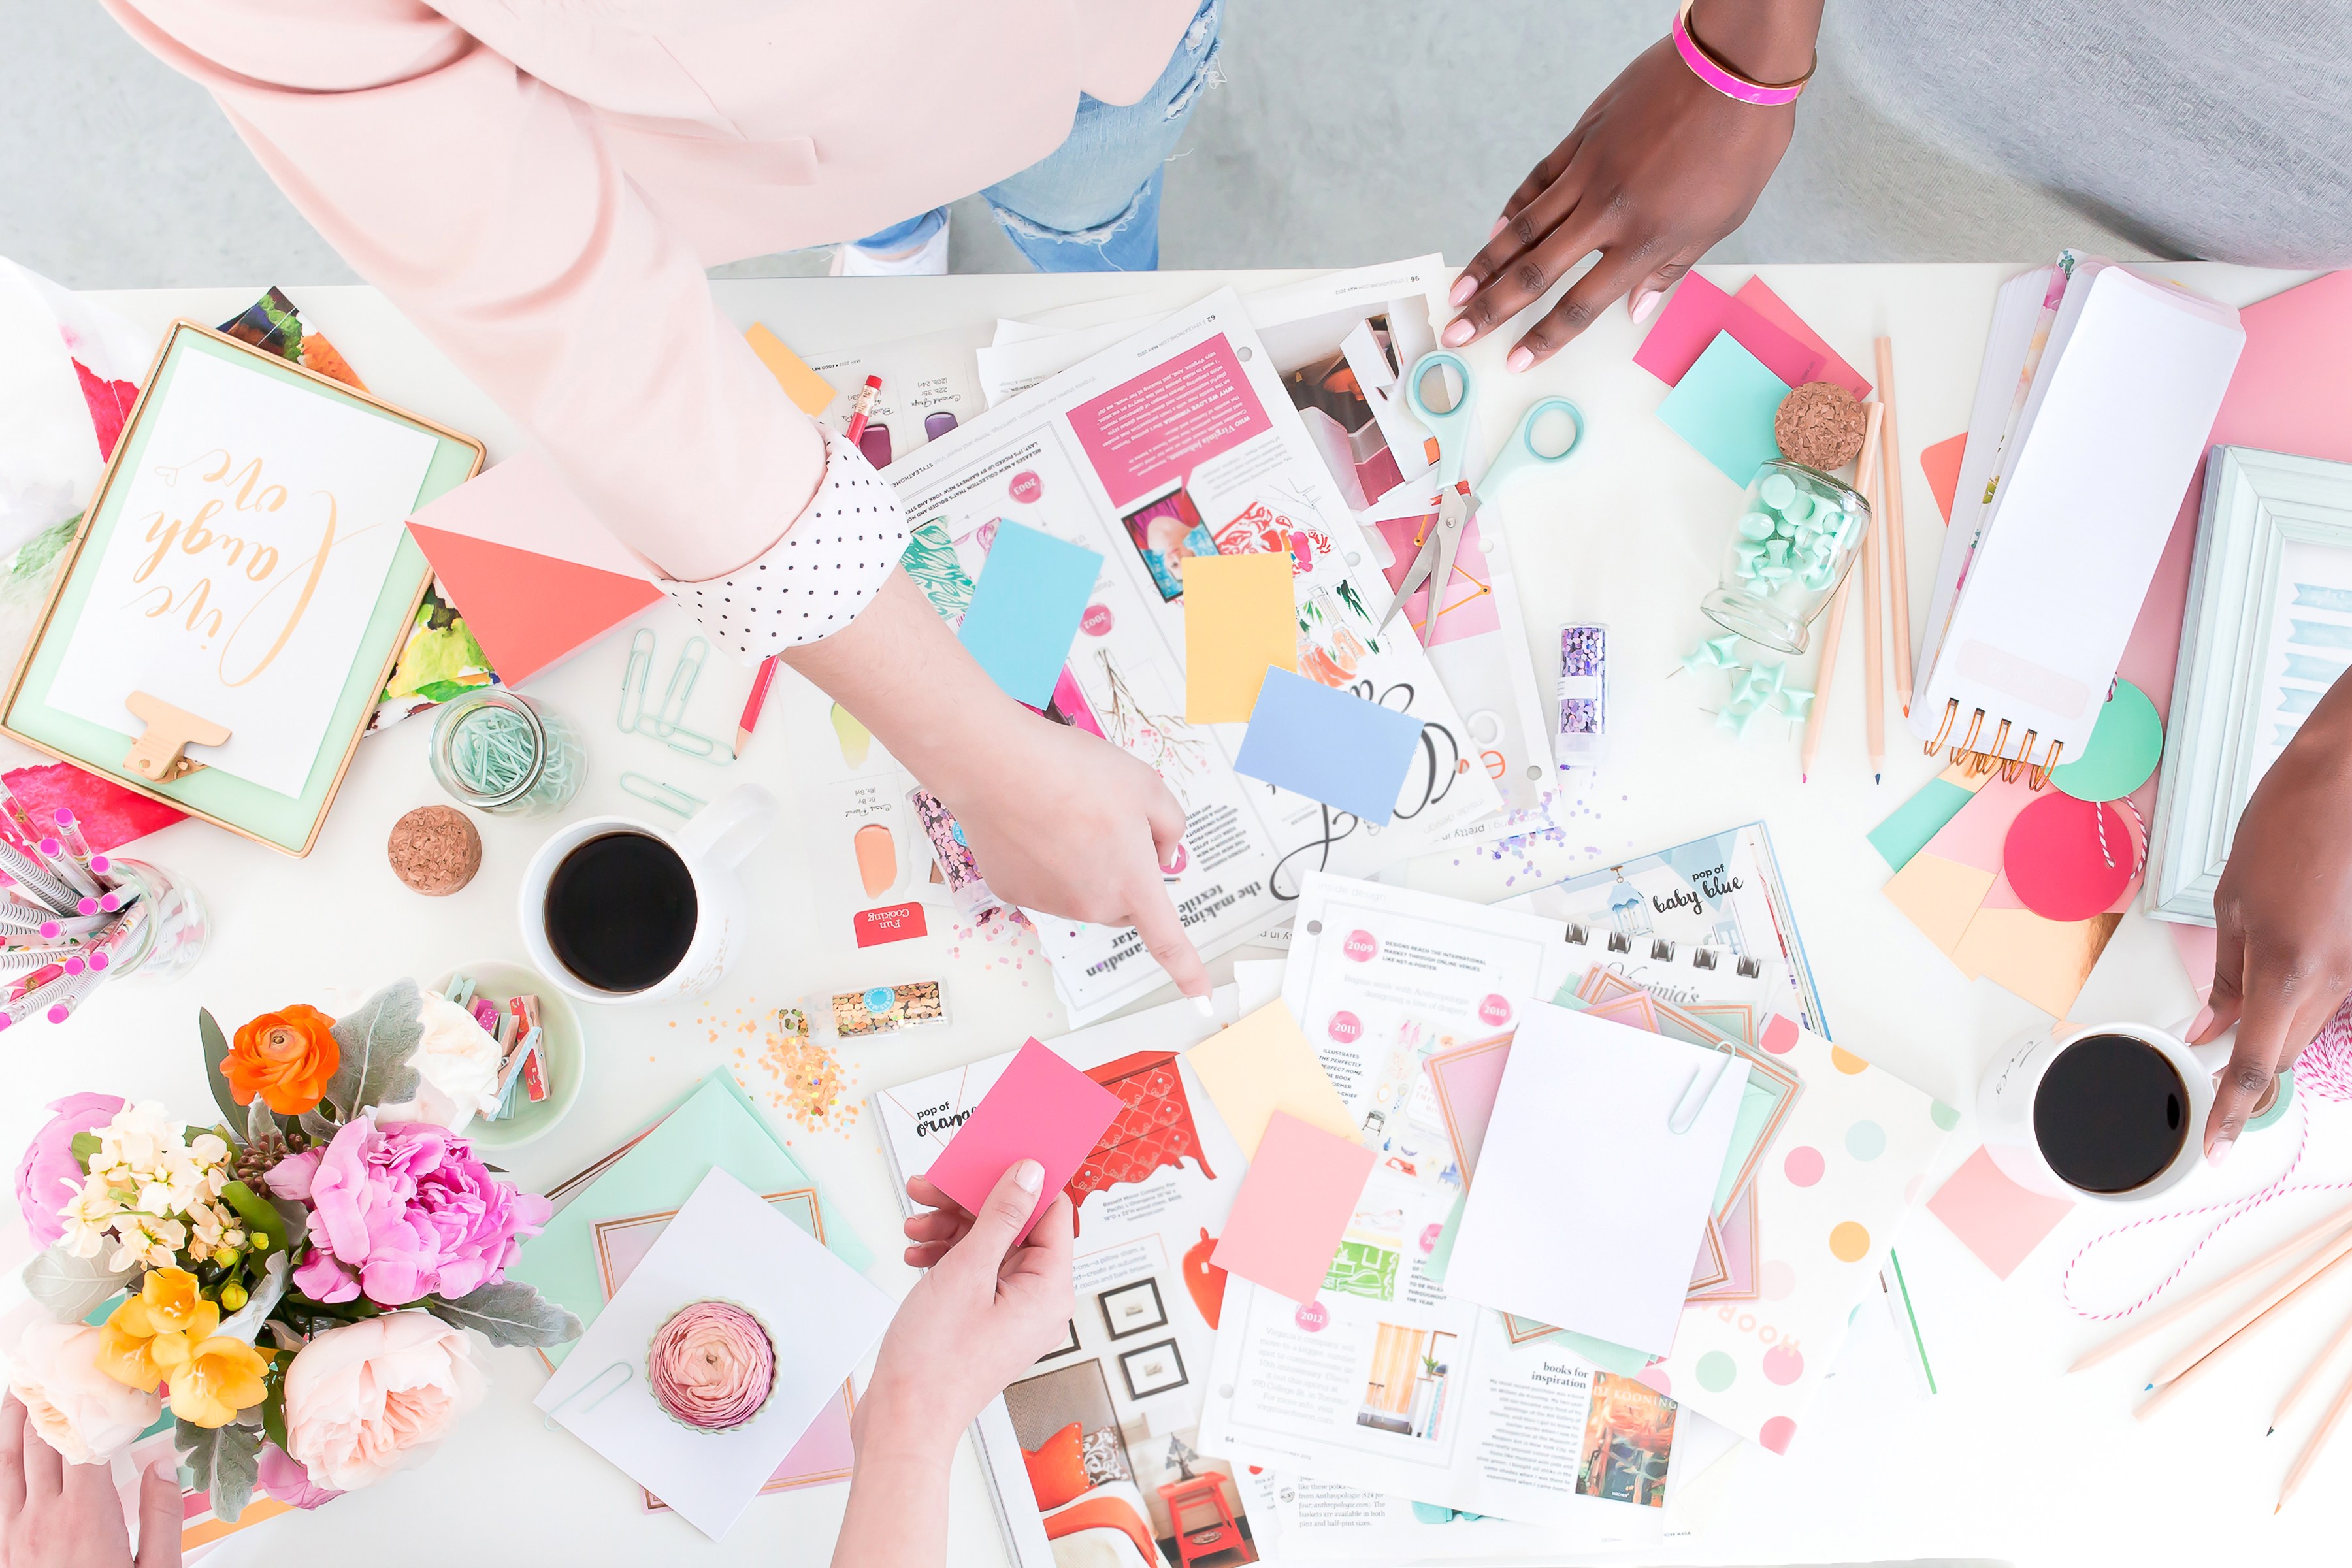 The Best Resources for Starting a Successful Craft Business